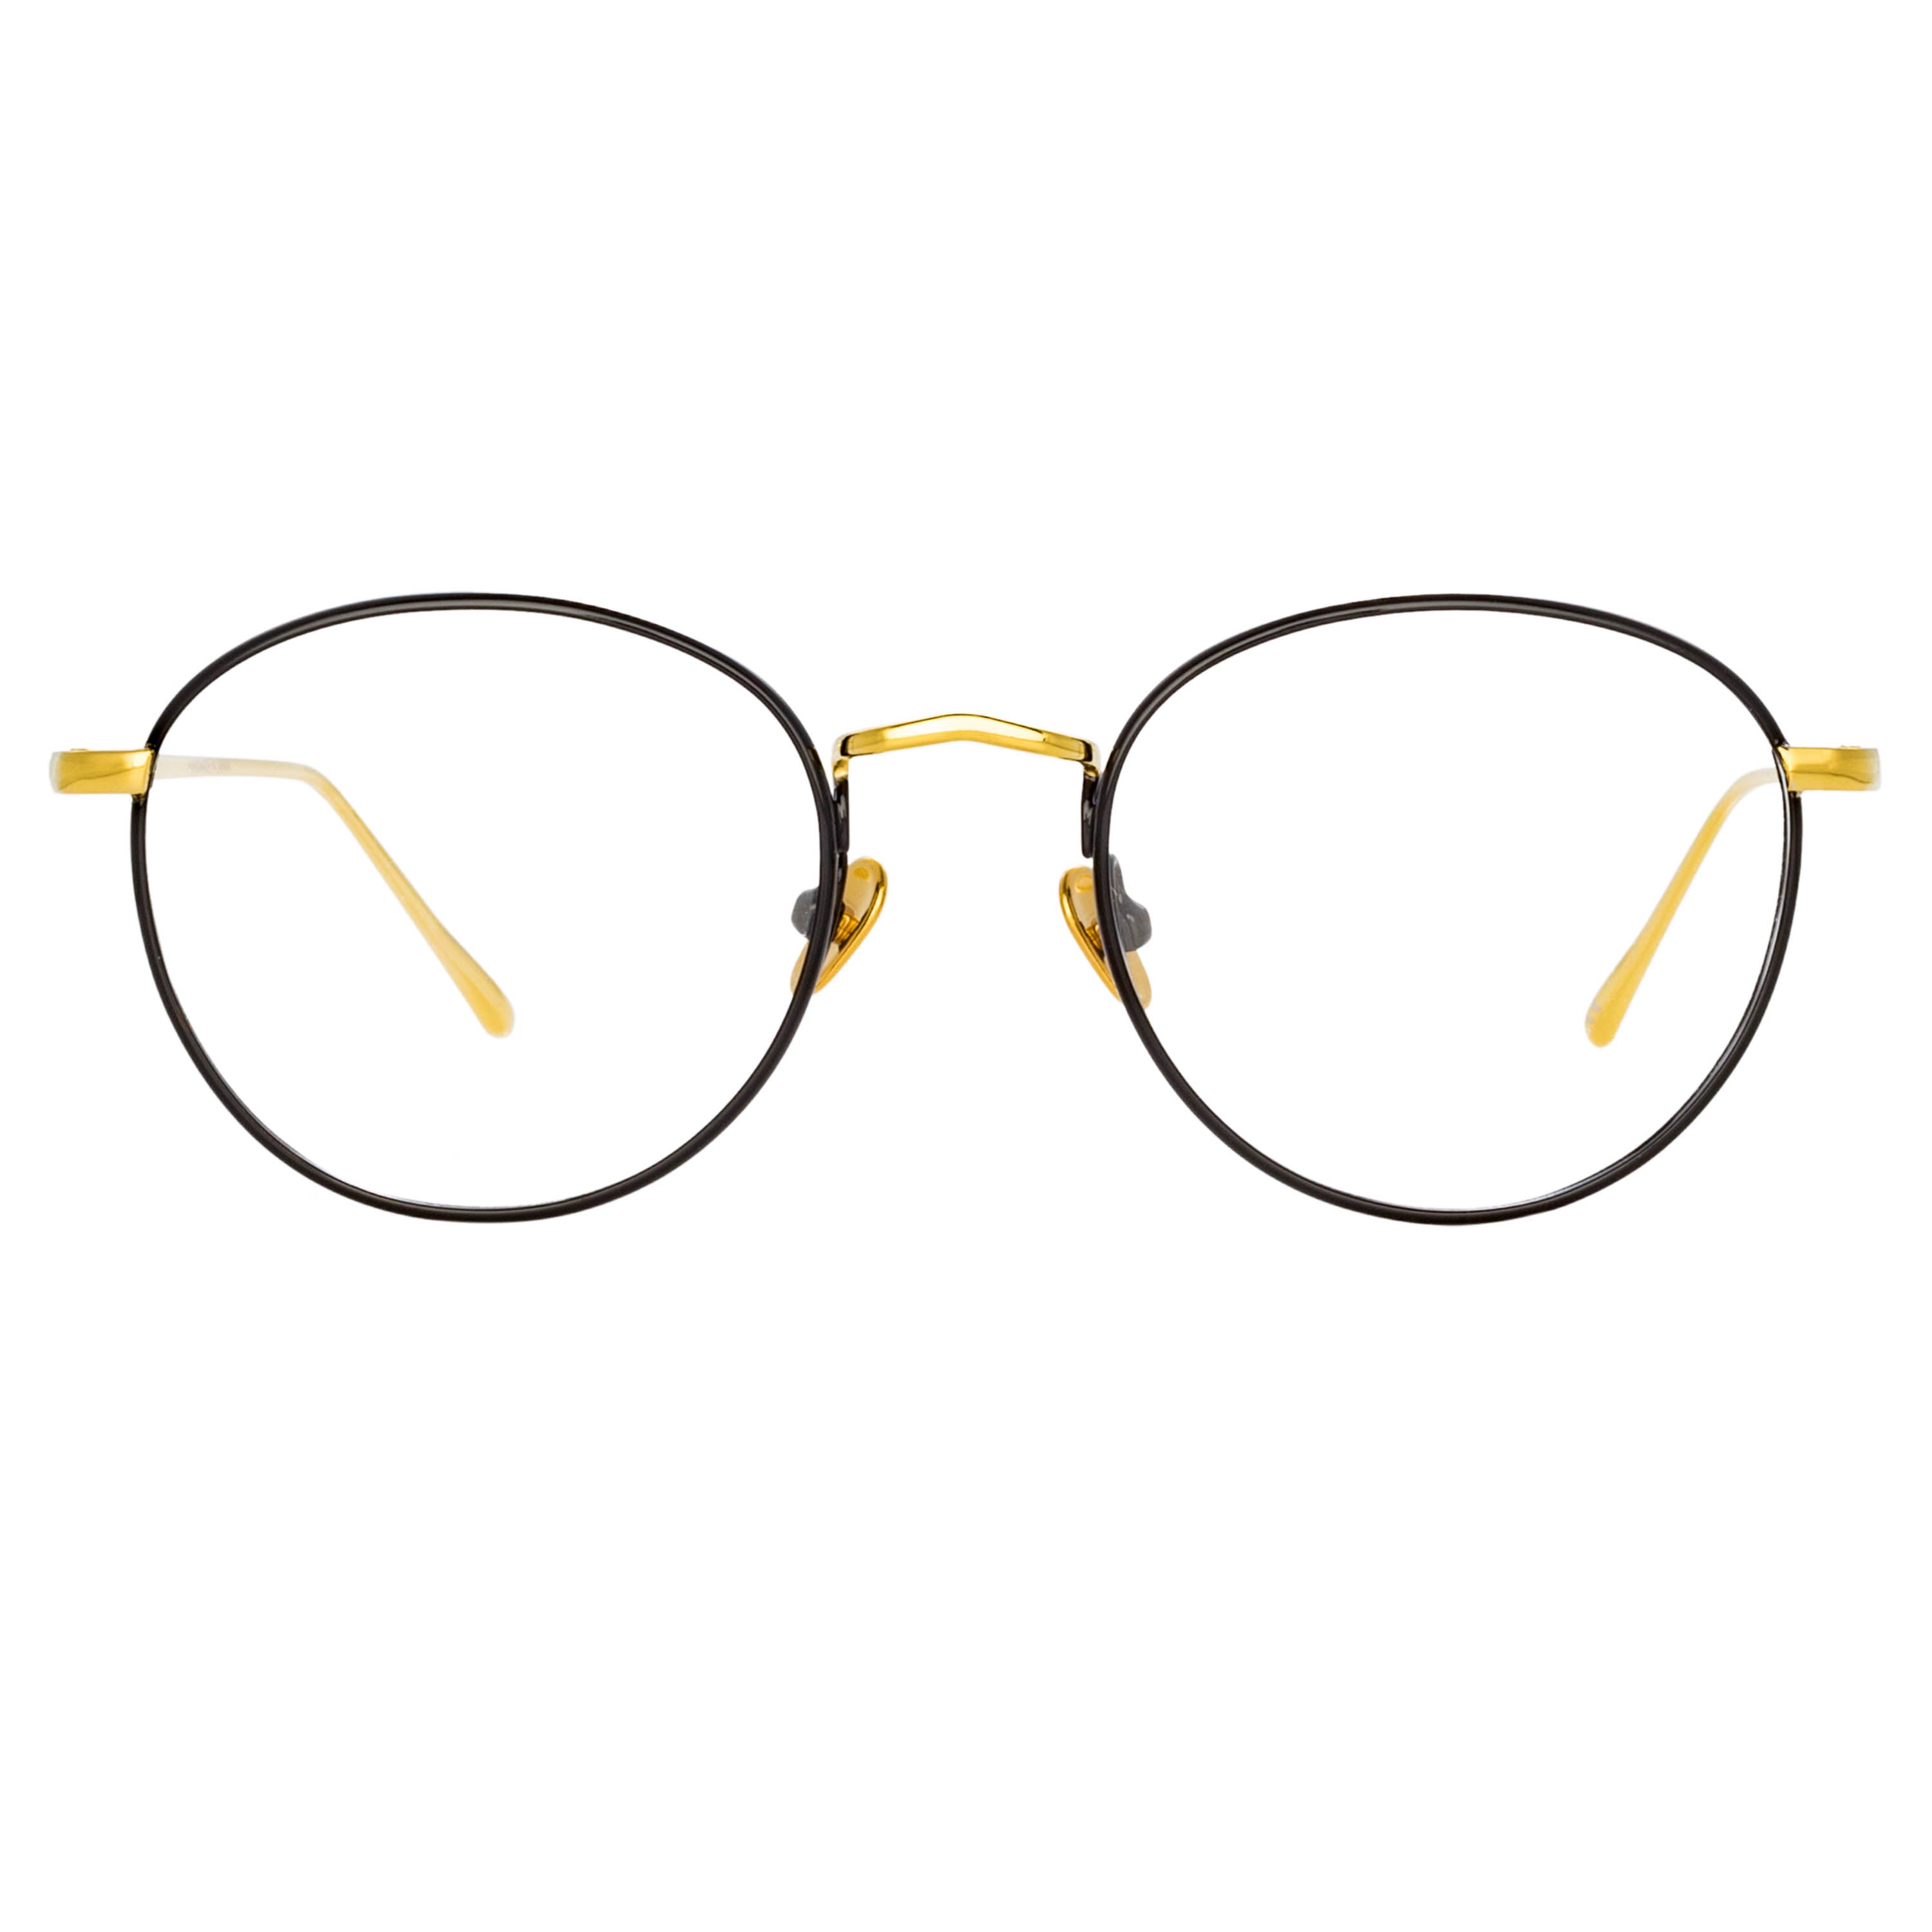 The Harrison Oval Optical Frame in Black and Yellow Gold